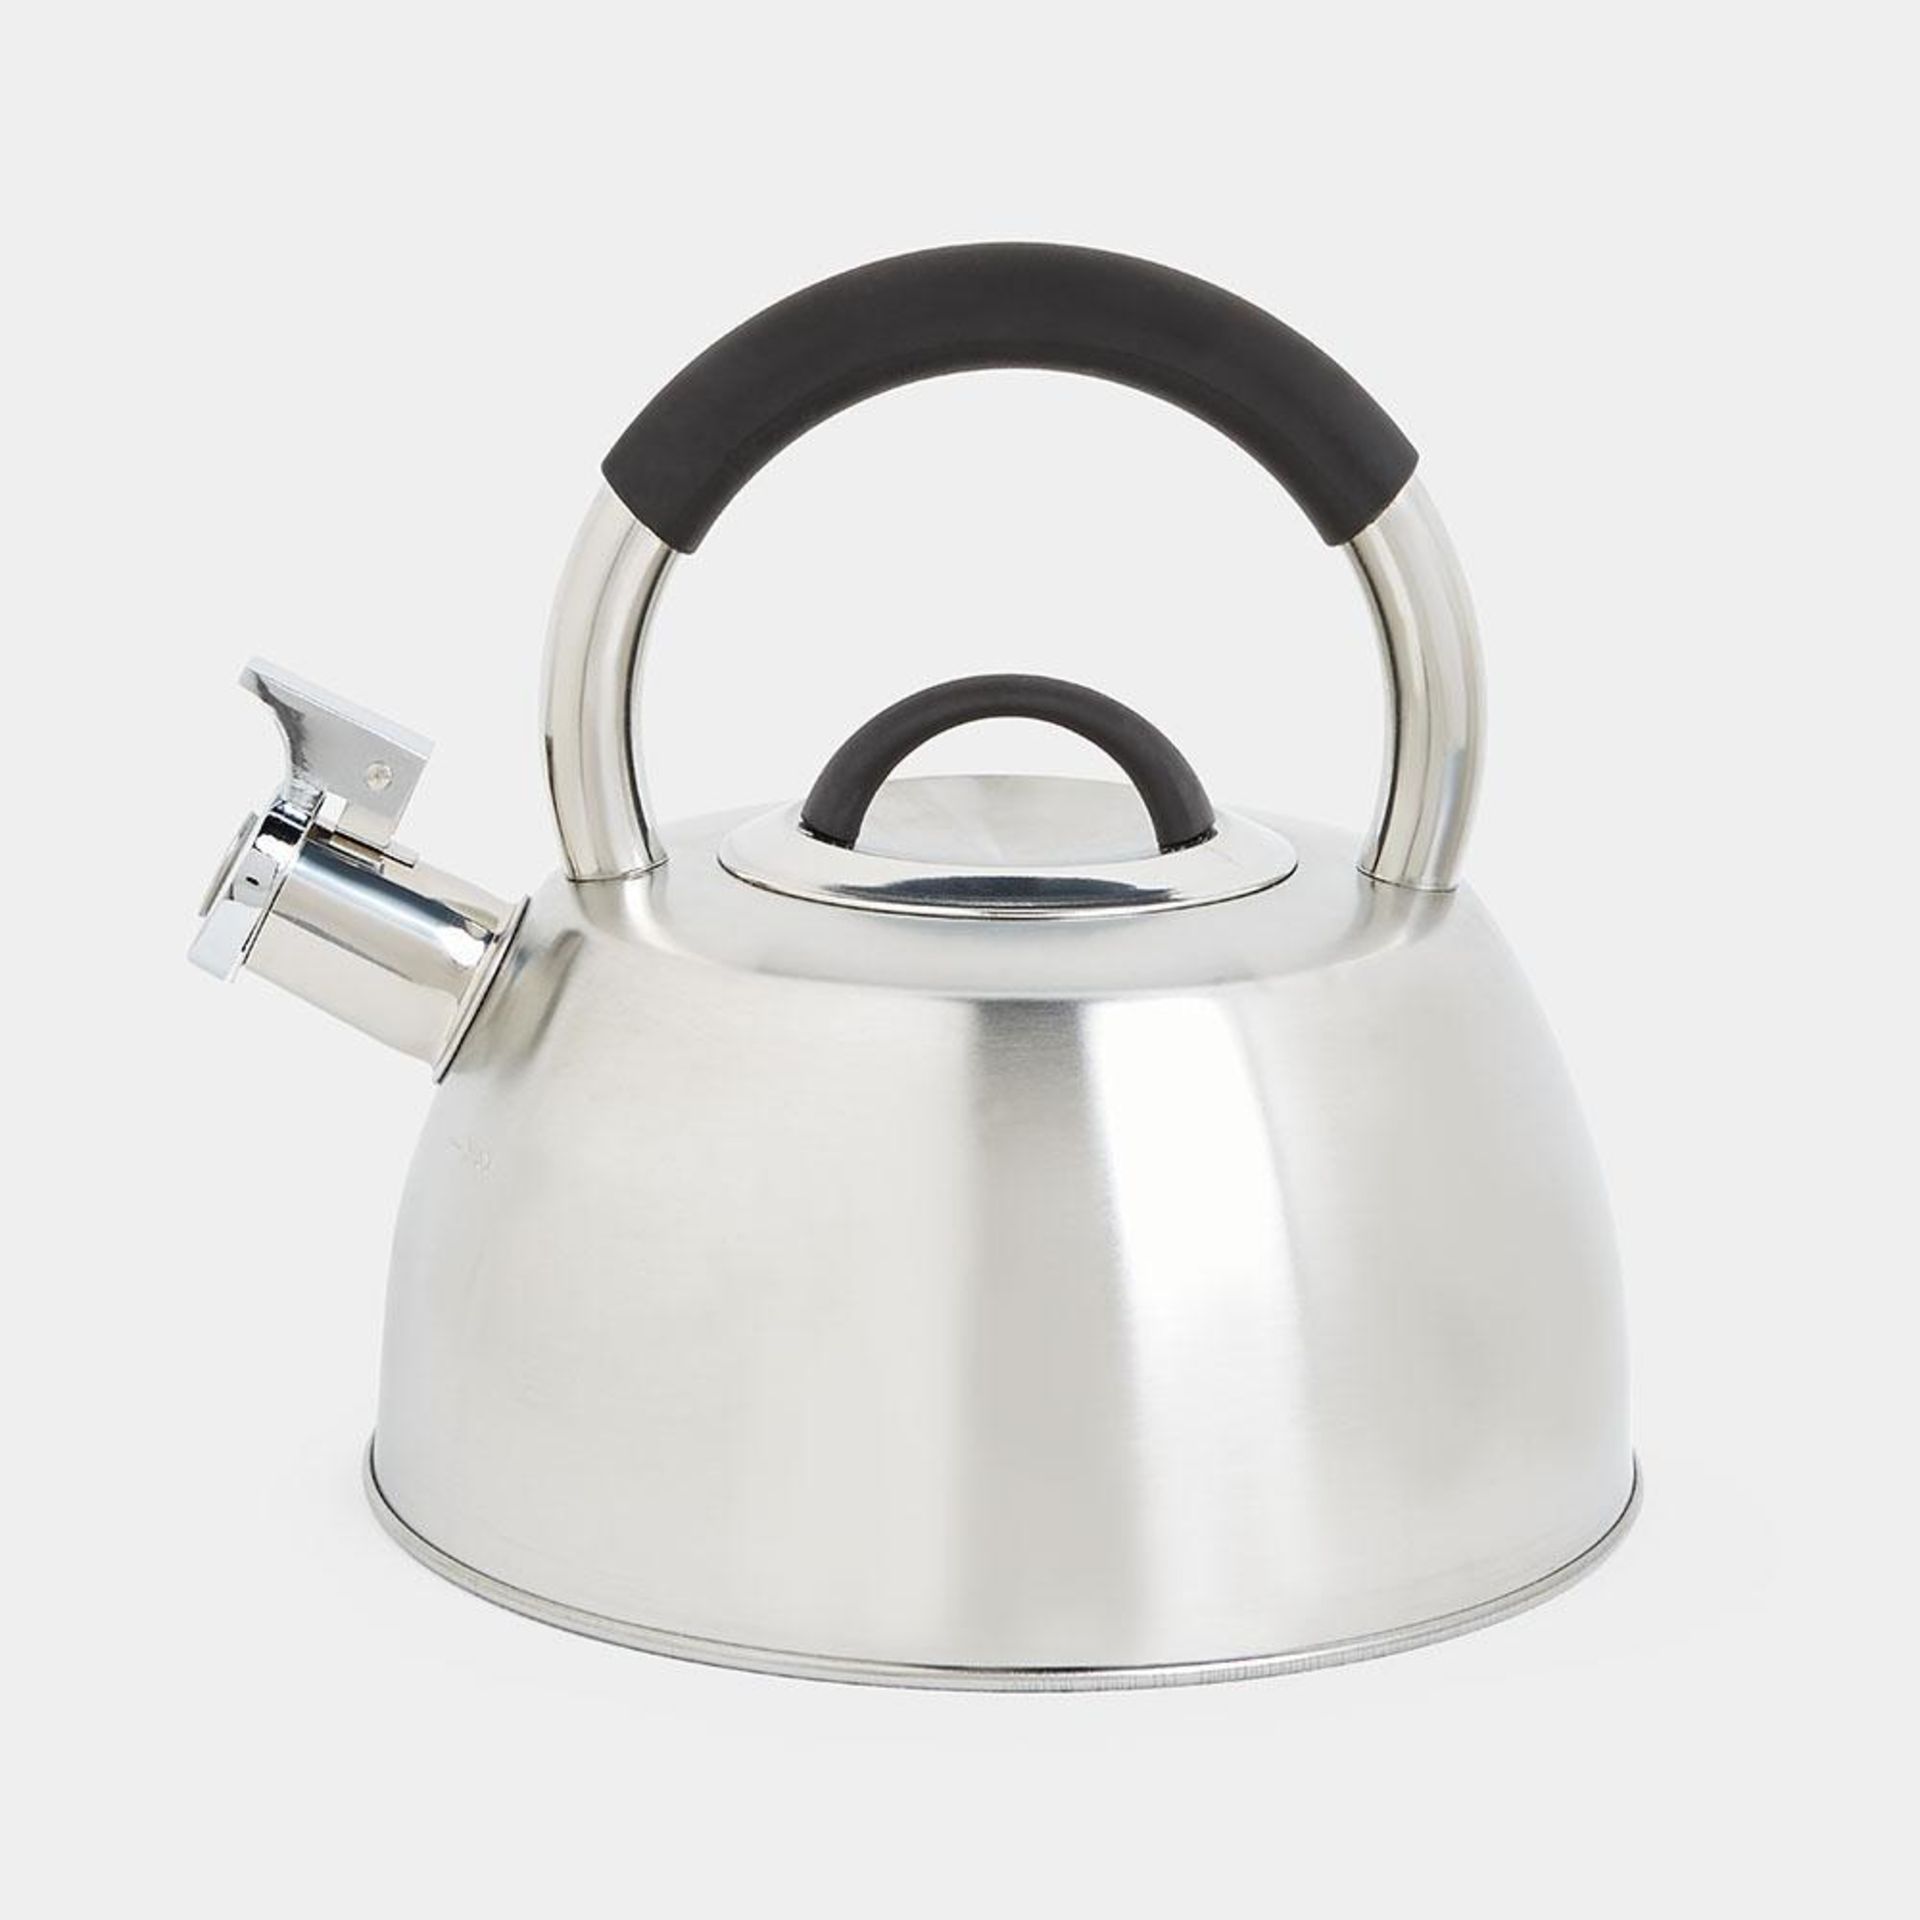 Silver Stainless Steel Whistling Stove Top Kettle - 2.5L - PW. Silver Stainless Steel Whistling